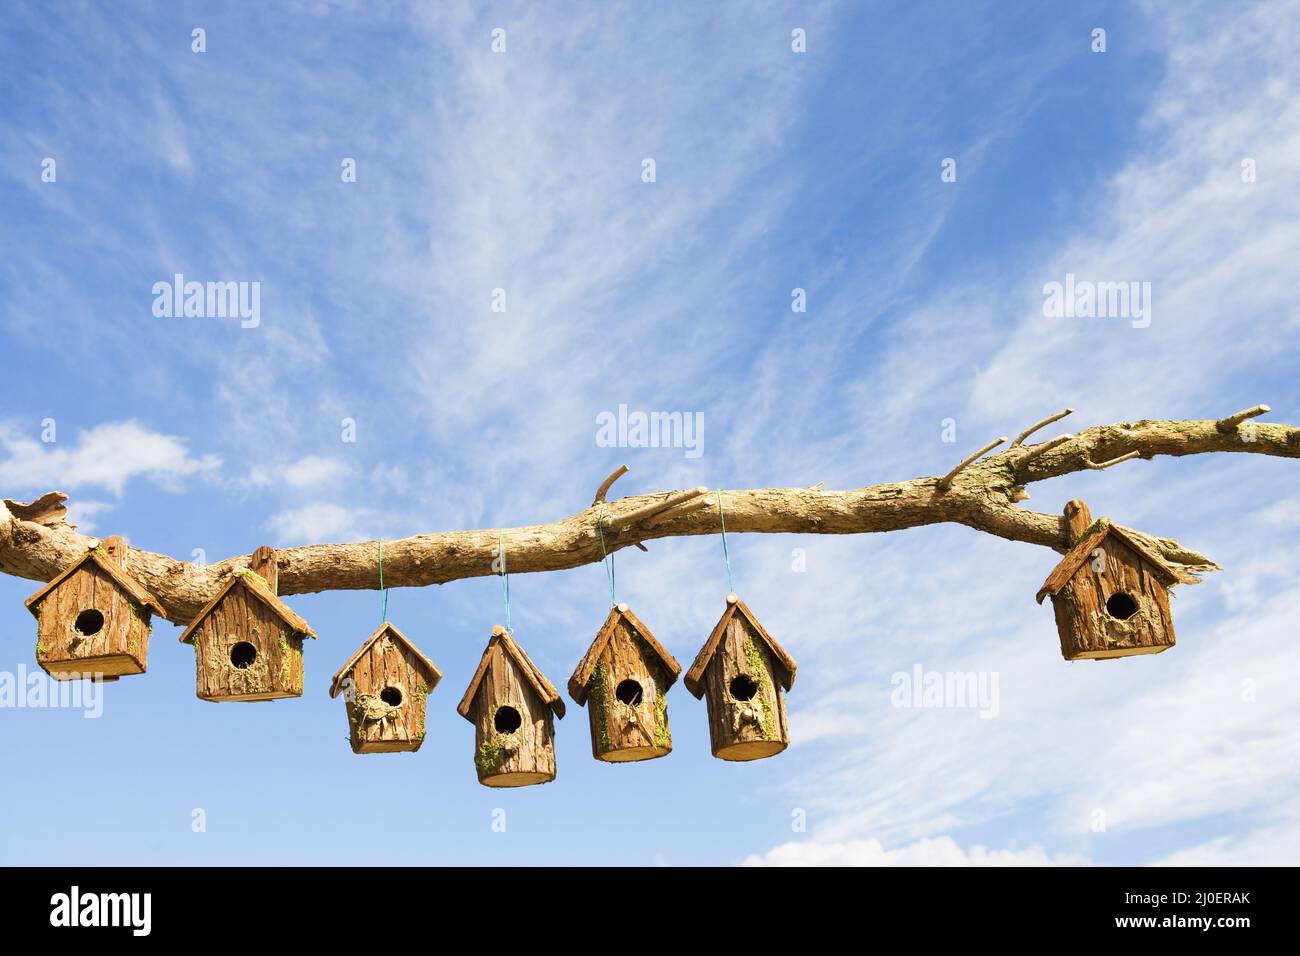 A row of wooden of bird boxes on a branch Stock Photo